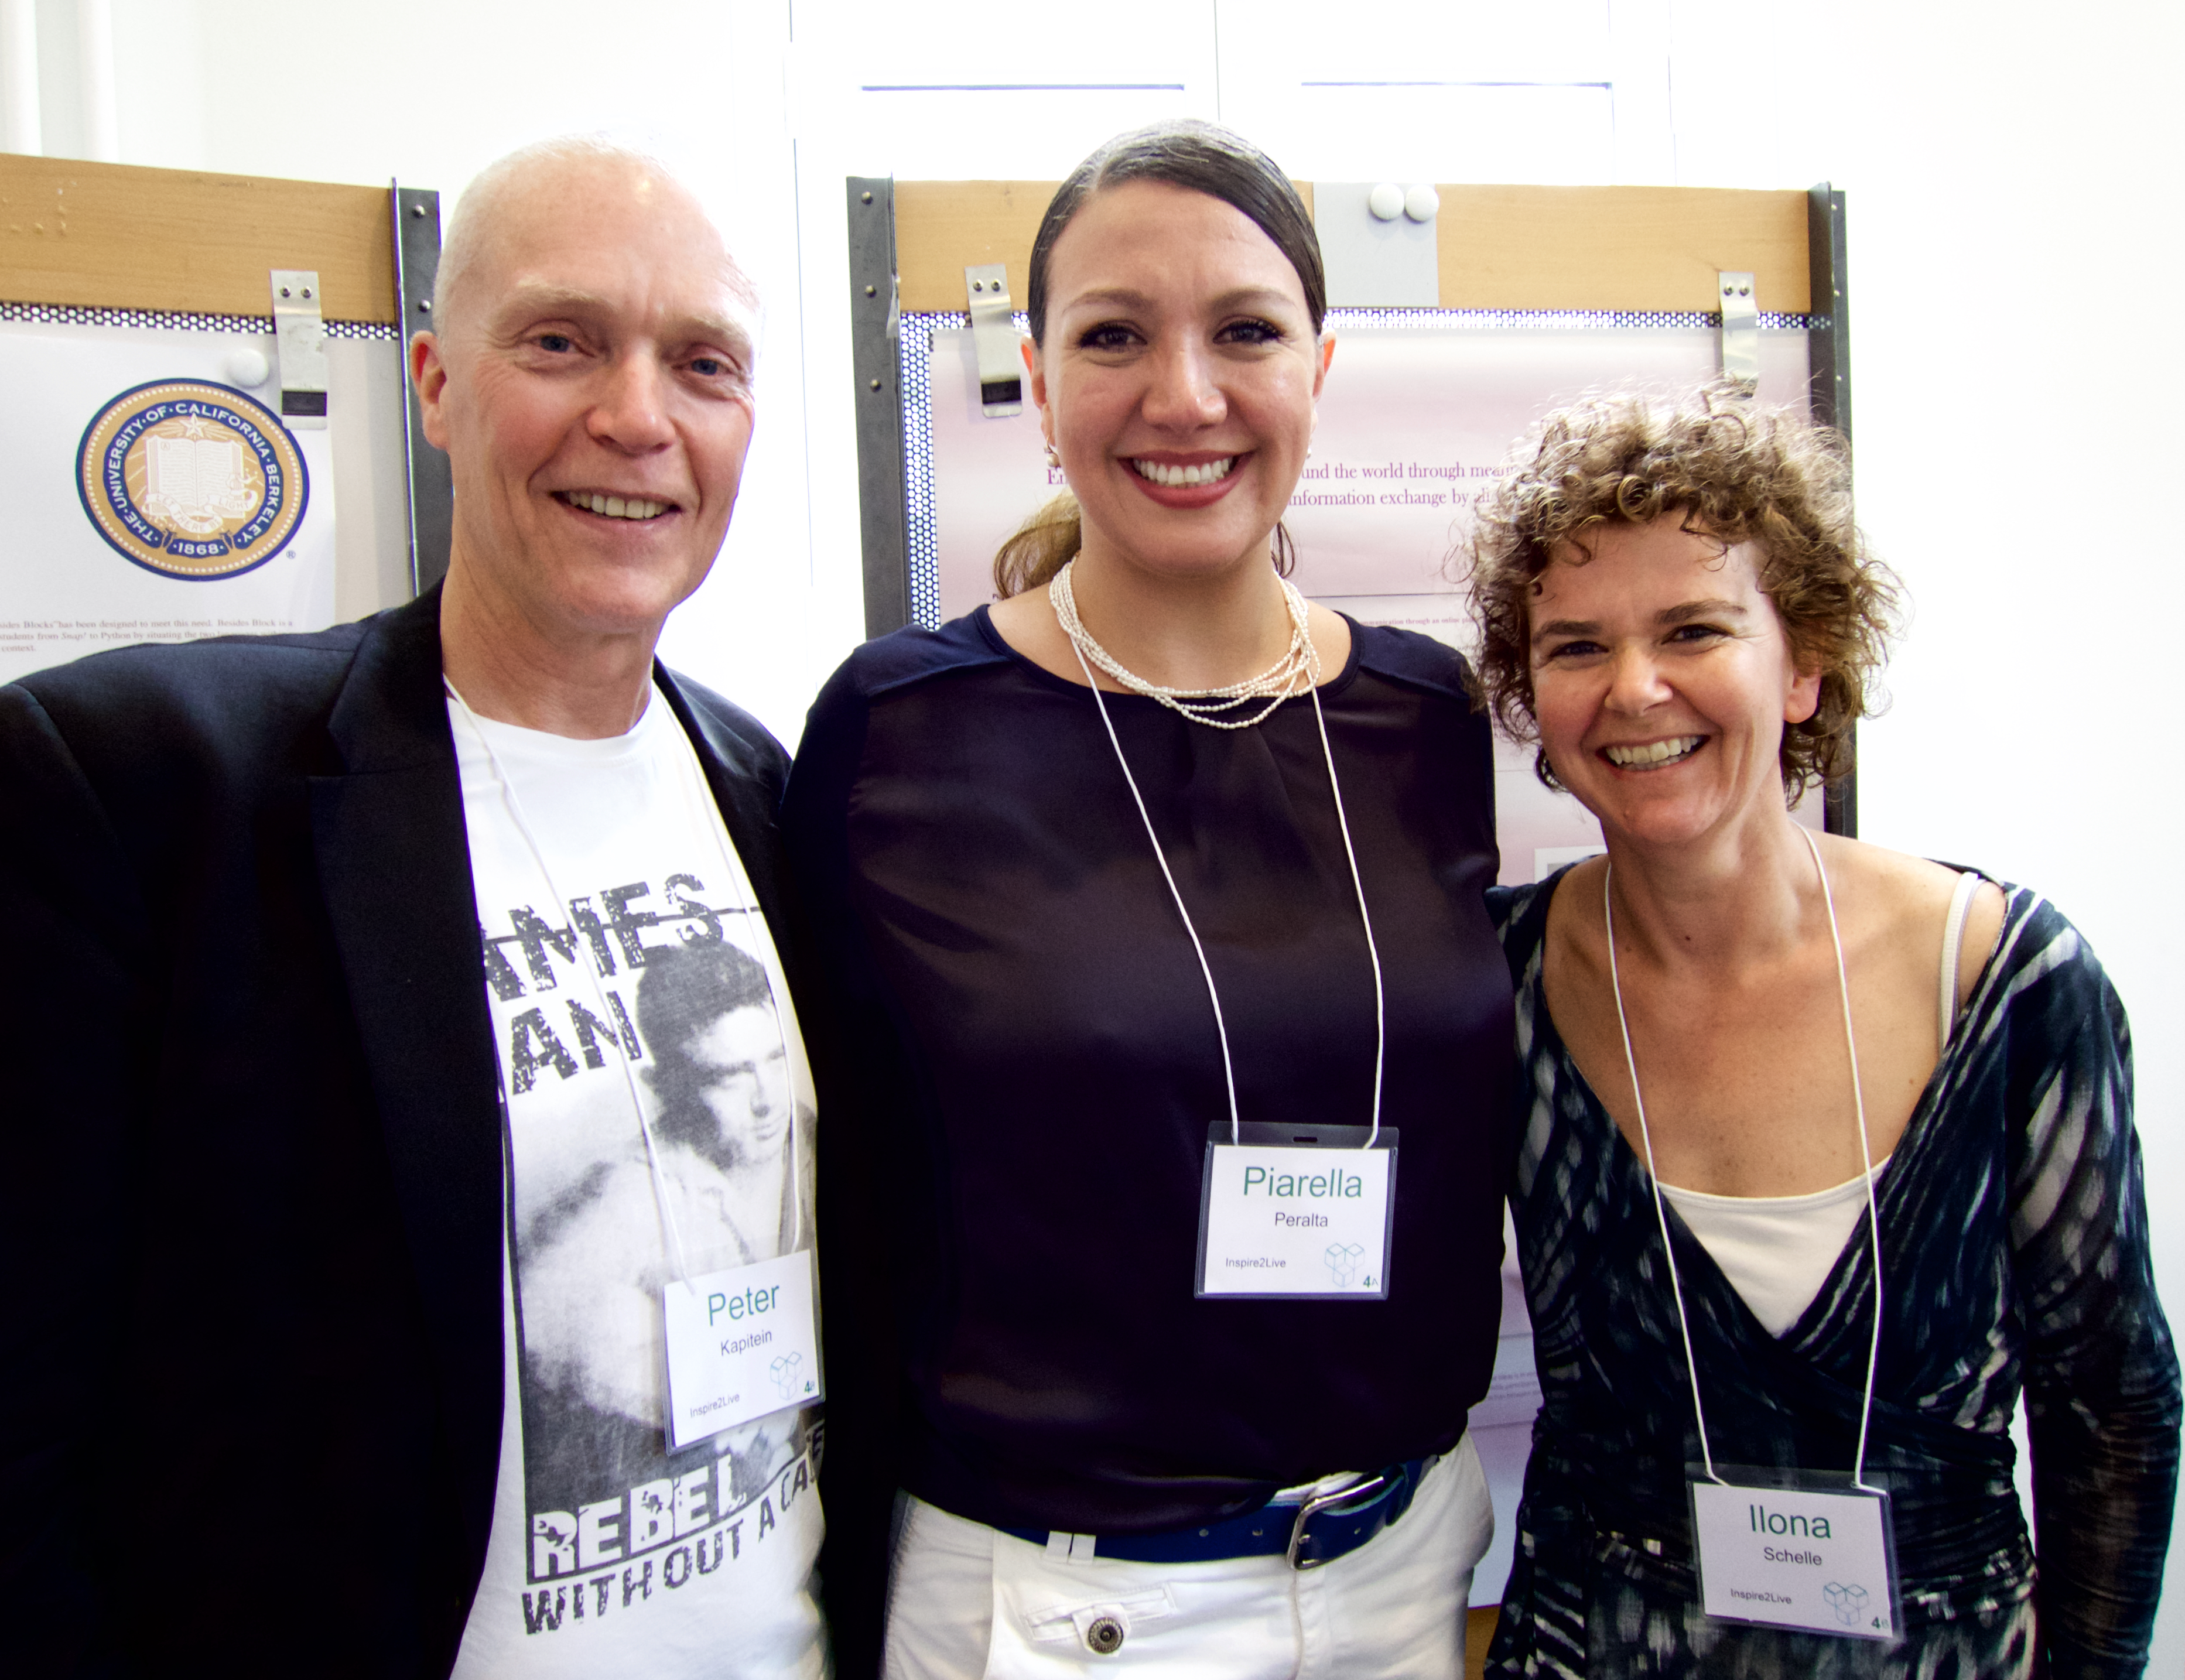 Sage Mentors Peter Kapitein and Ilona Schelle from Inspire2Live flank Sage Scholar Piarella Peralta at the Paris Sage Assembly, April 16, 2015.